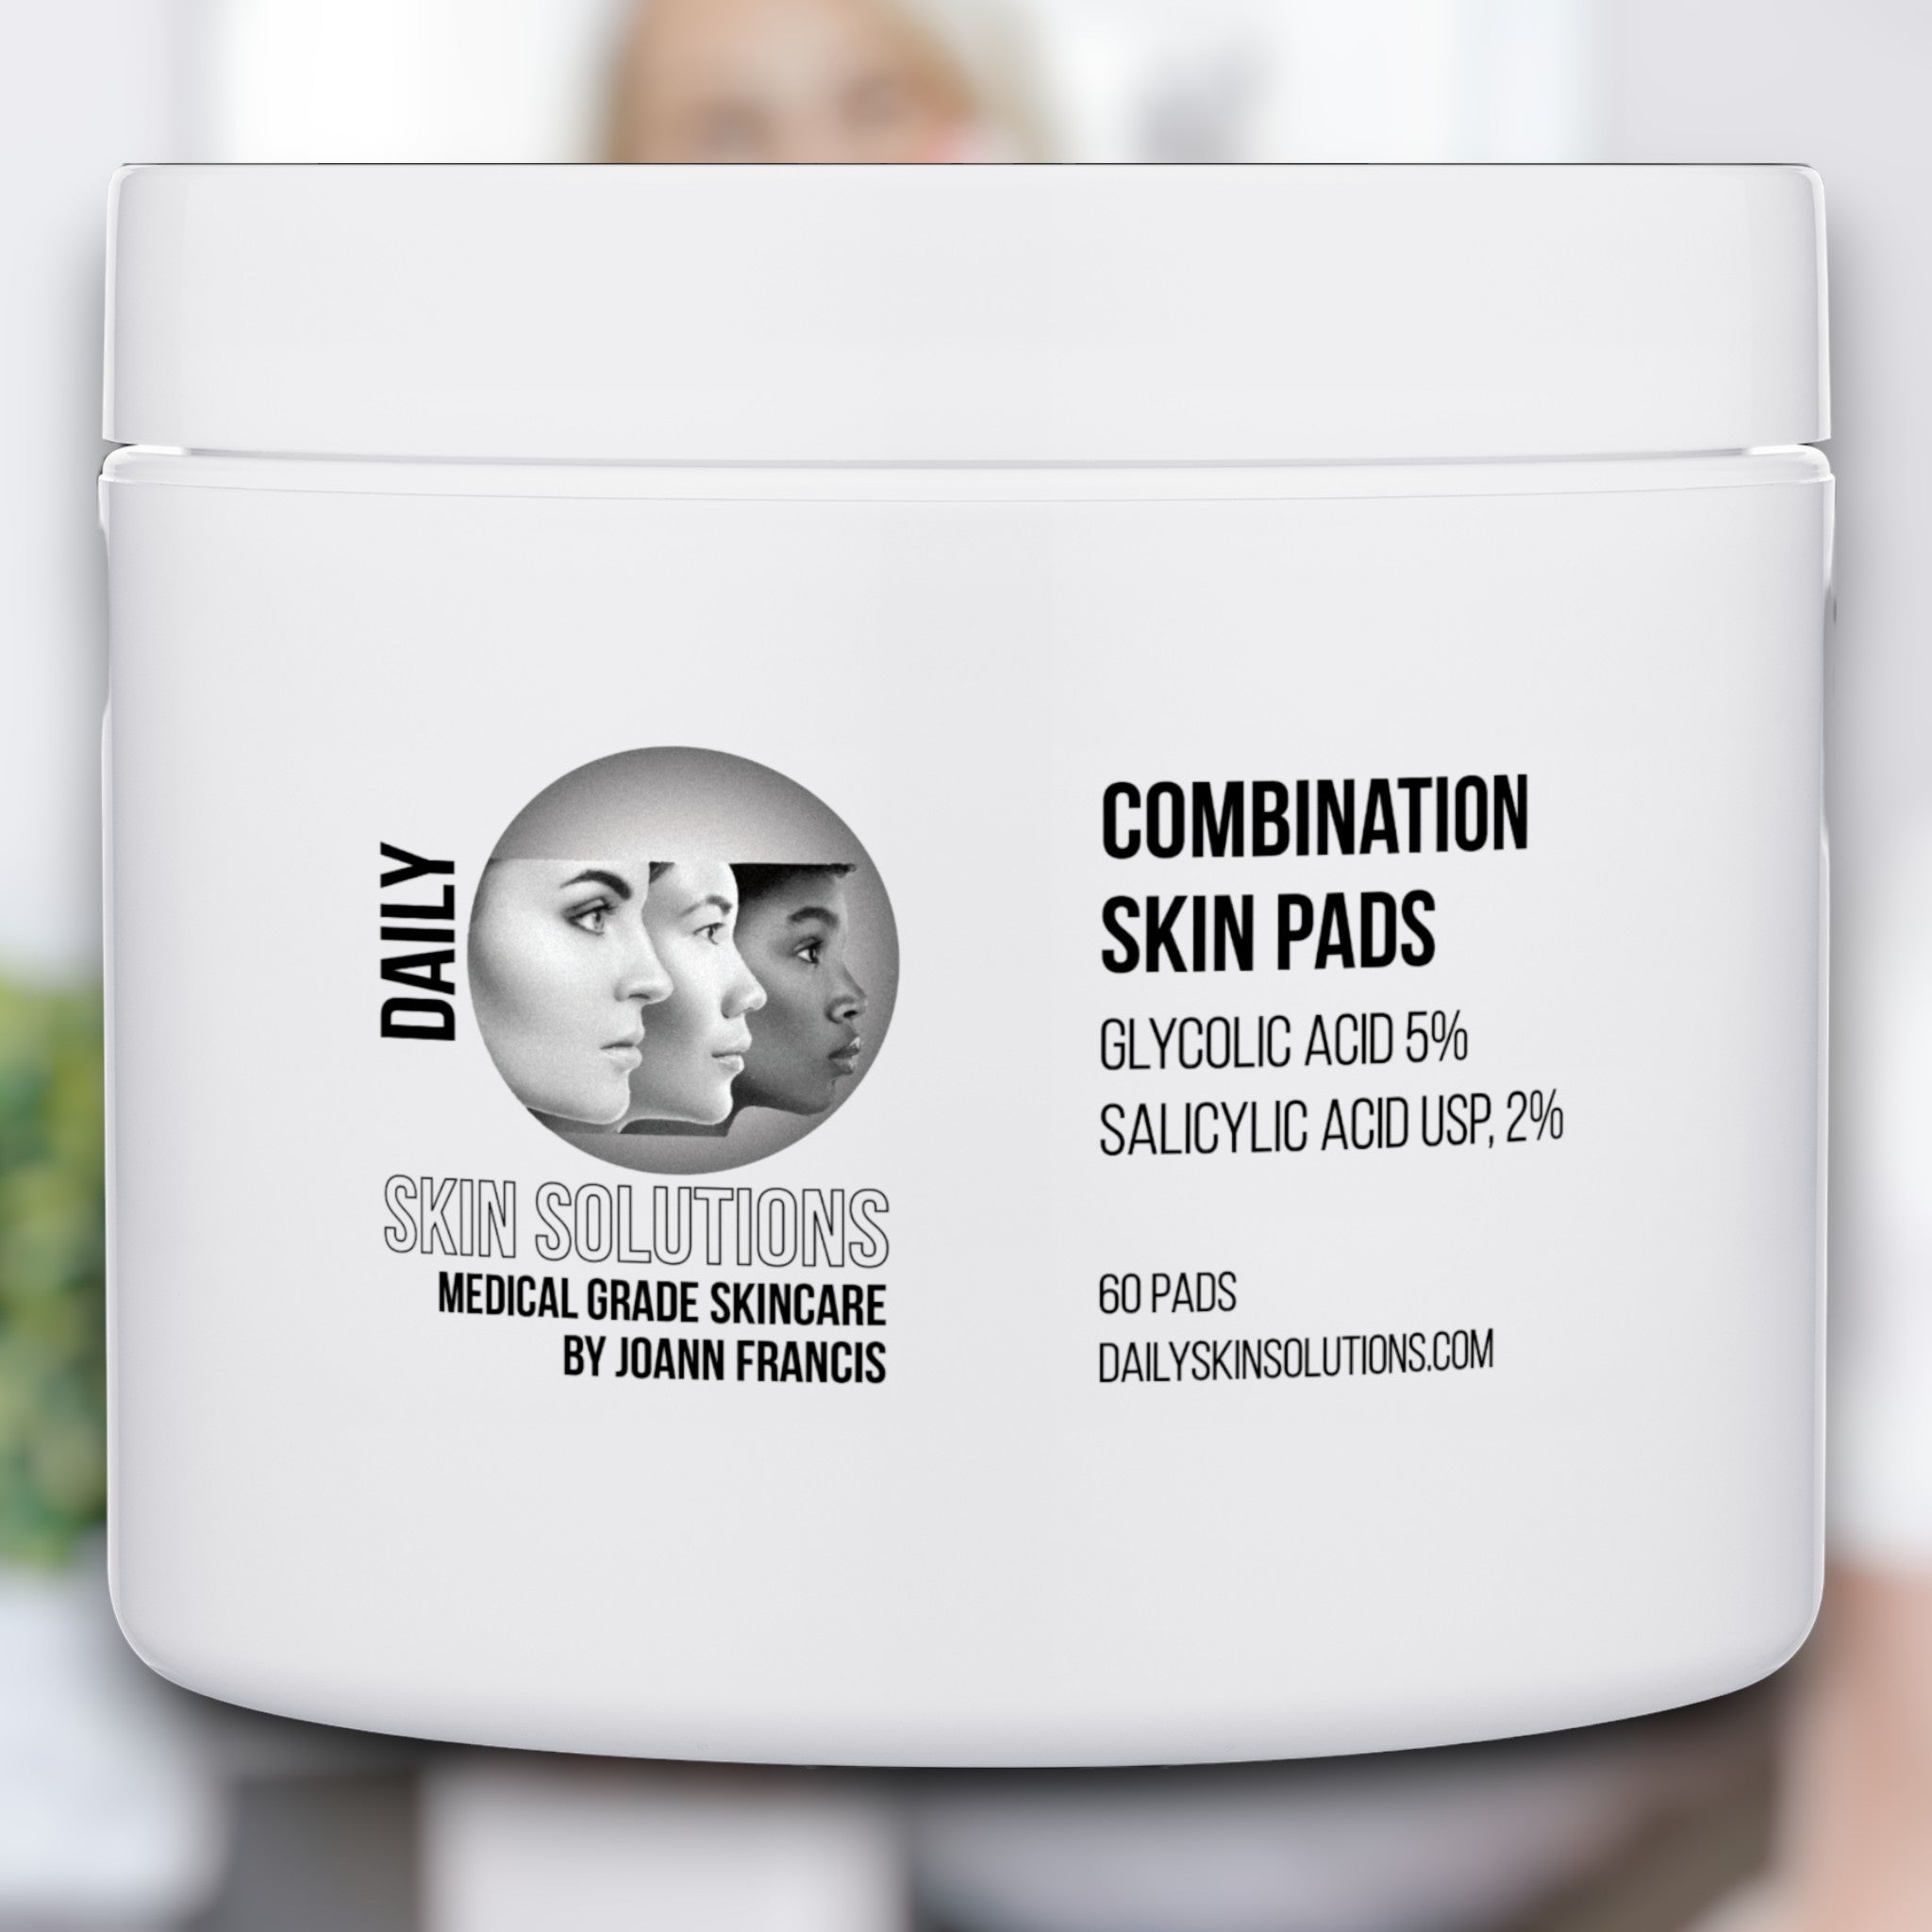 Combination Skin Pads by Daily Skin Solutions